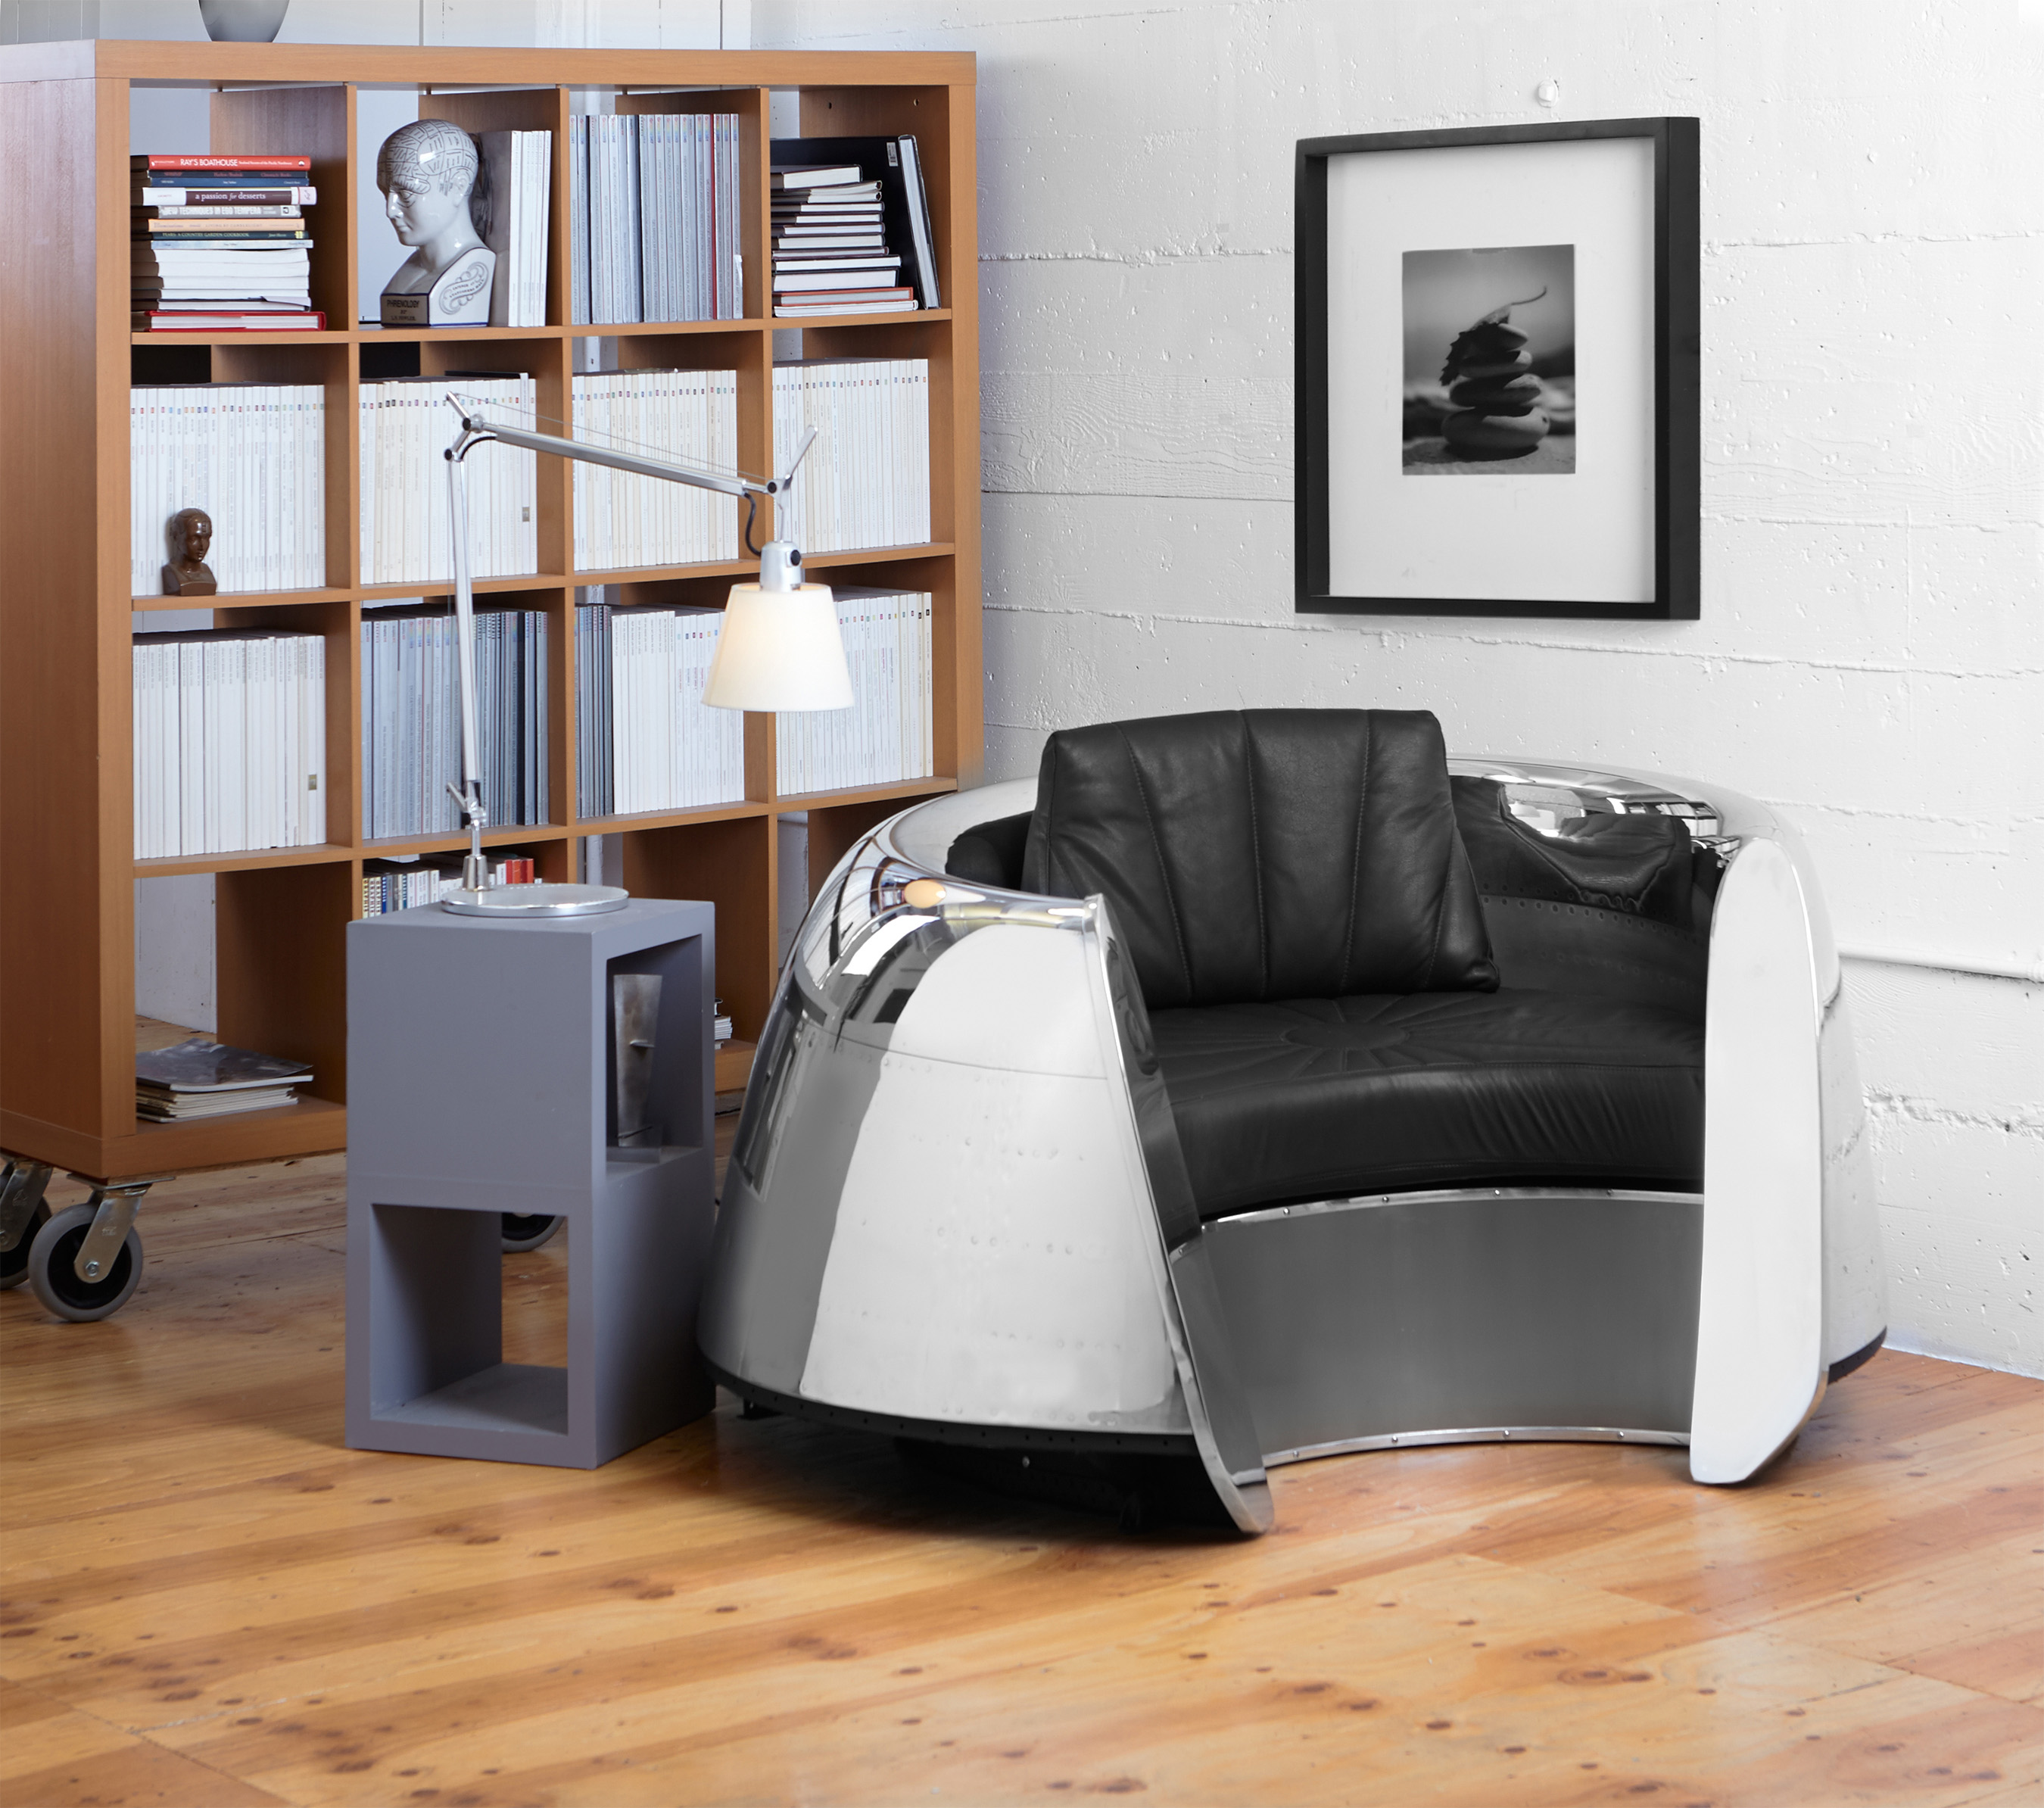 This engine cowling chair is a popular item.